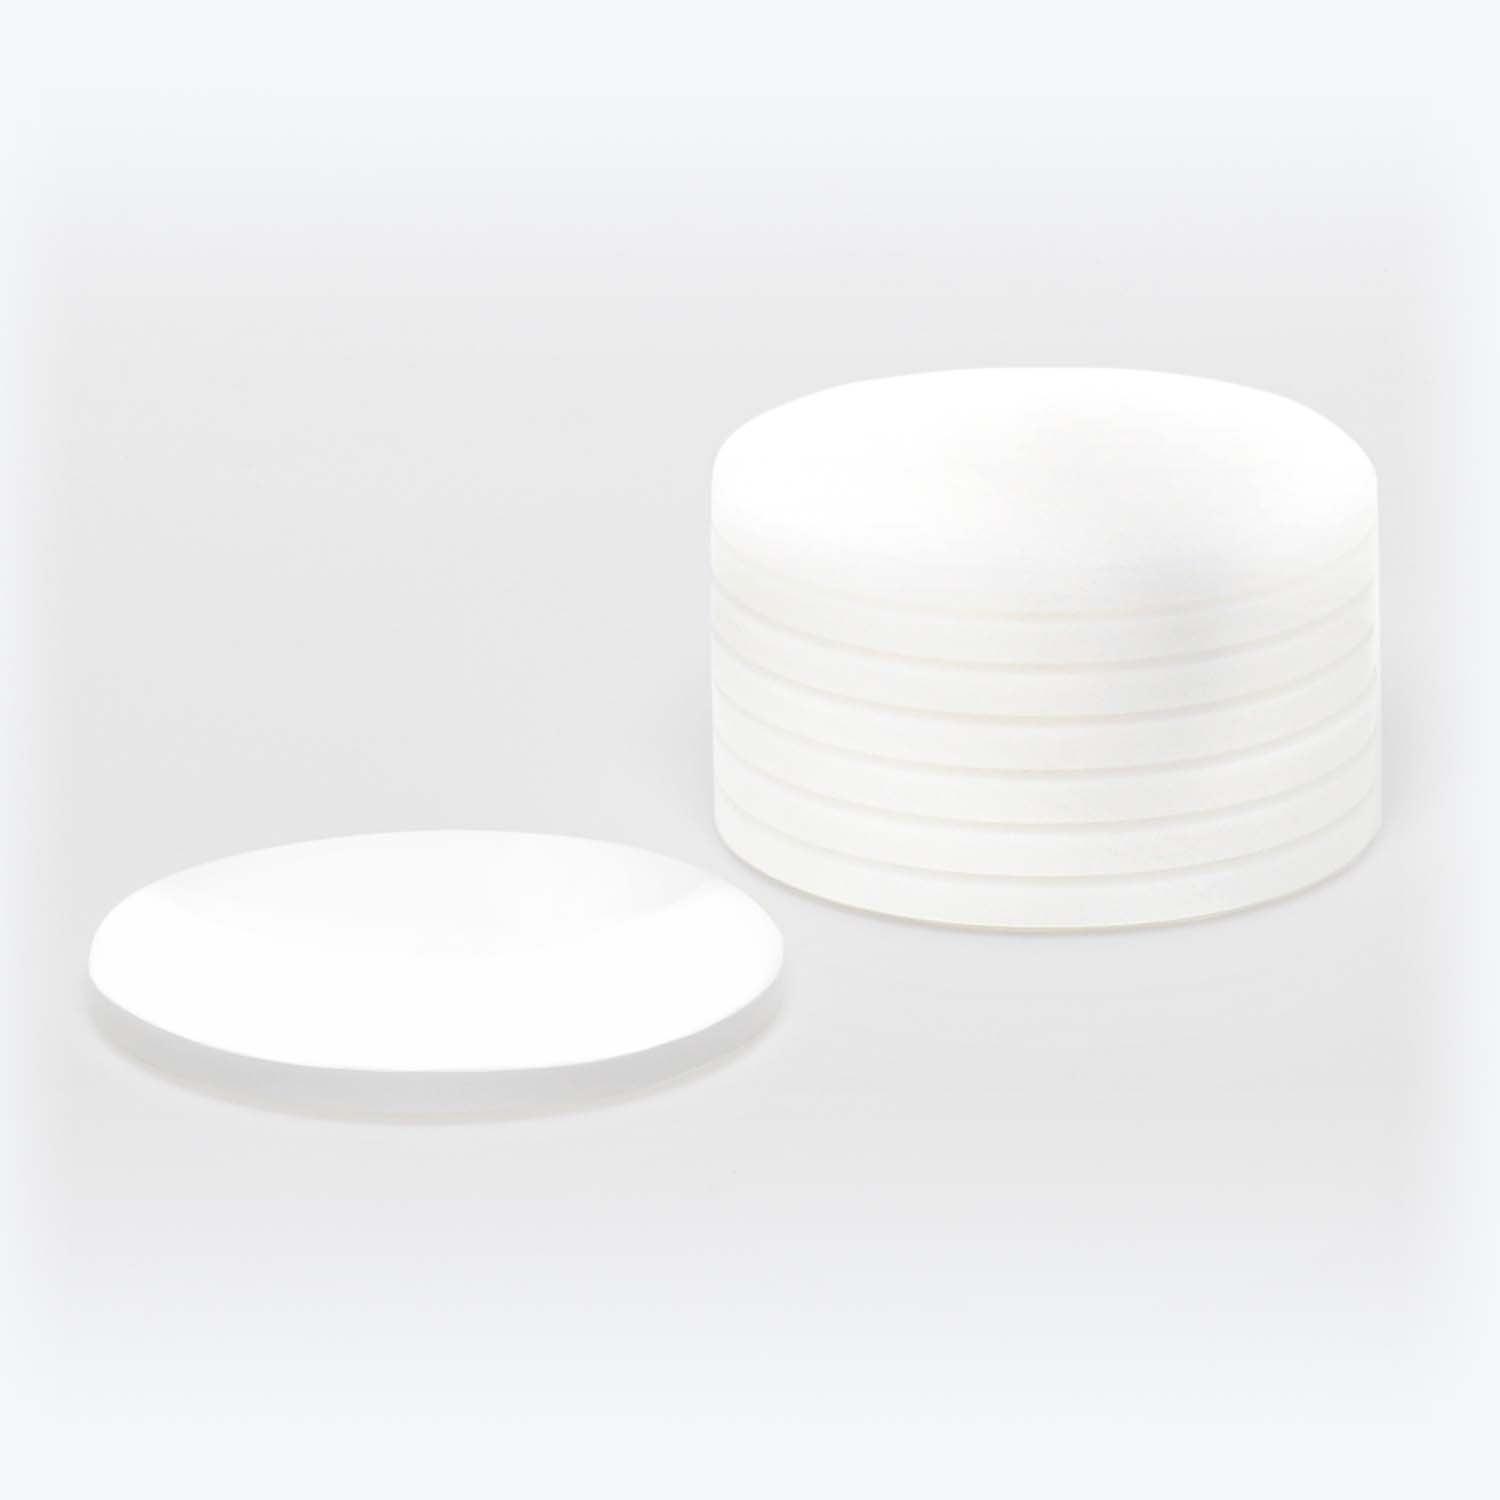 Minimalistic and modern design of identical ceramic plates in soft lighting.